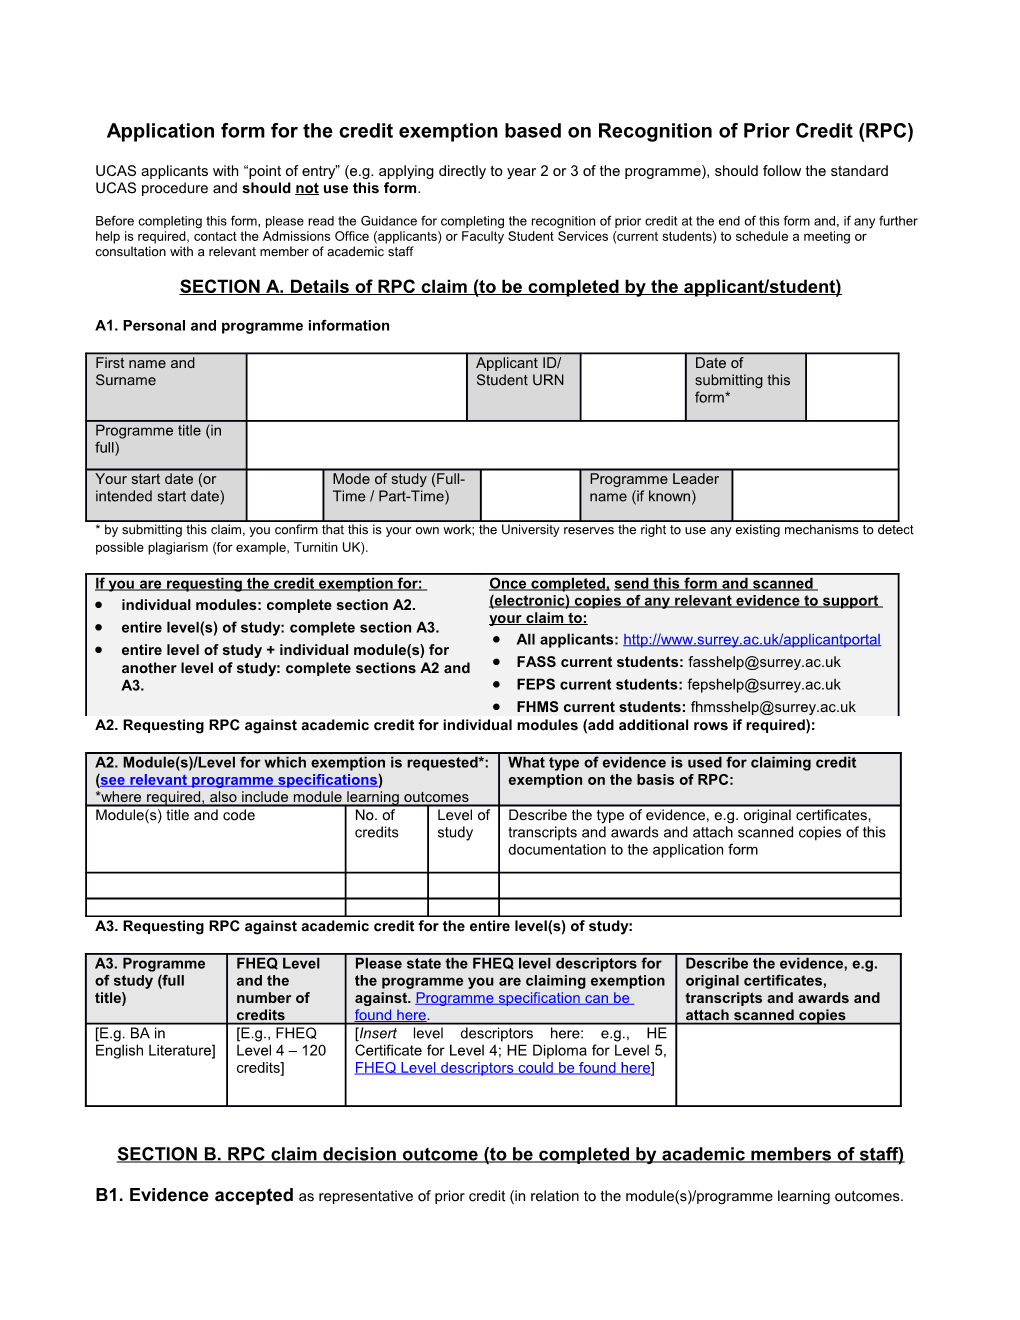 Application Form for the Credit Exemption Based on Recognition of Prior Credit (RPC)